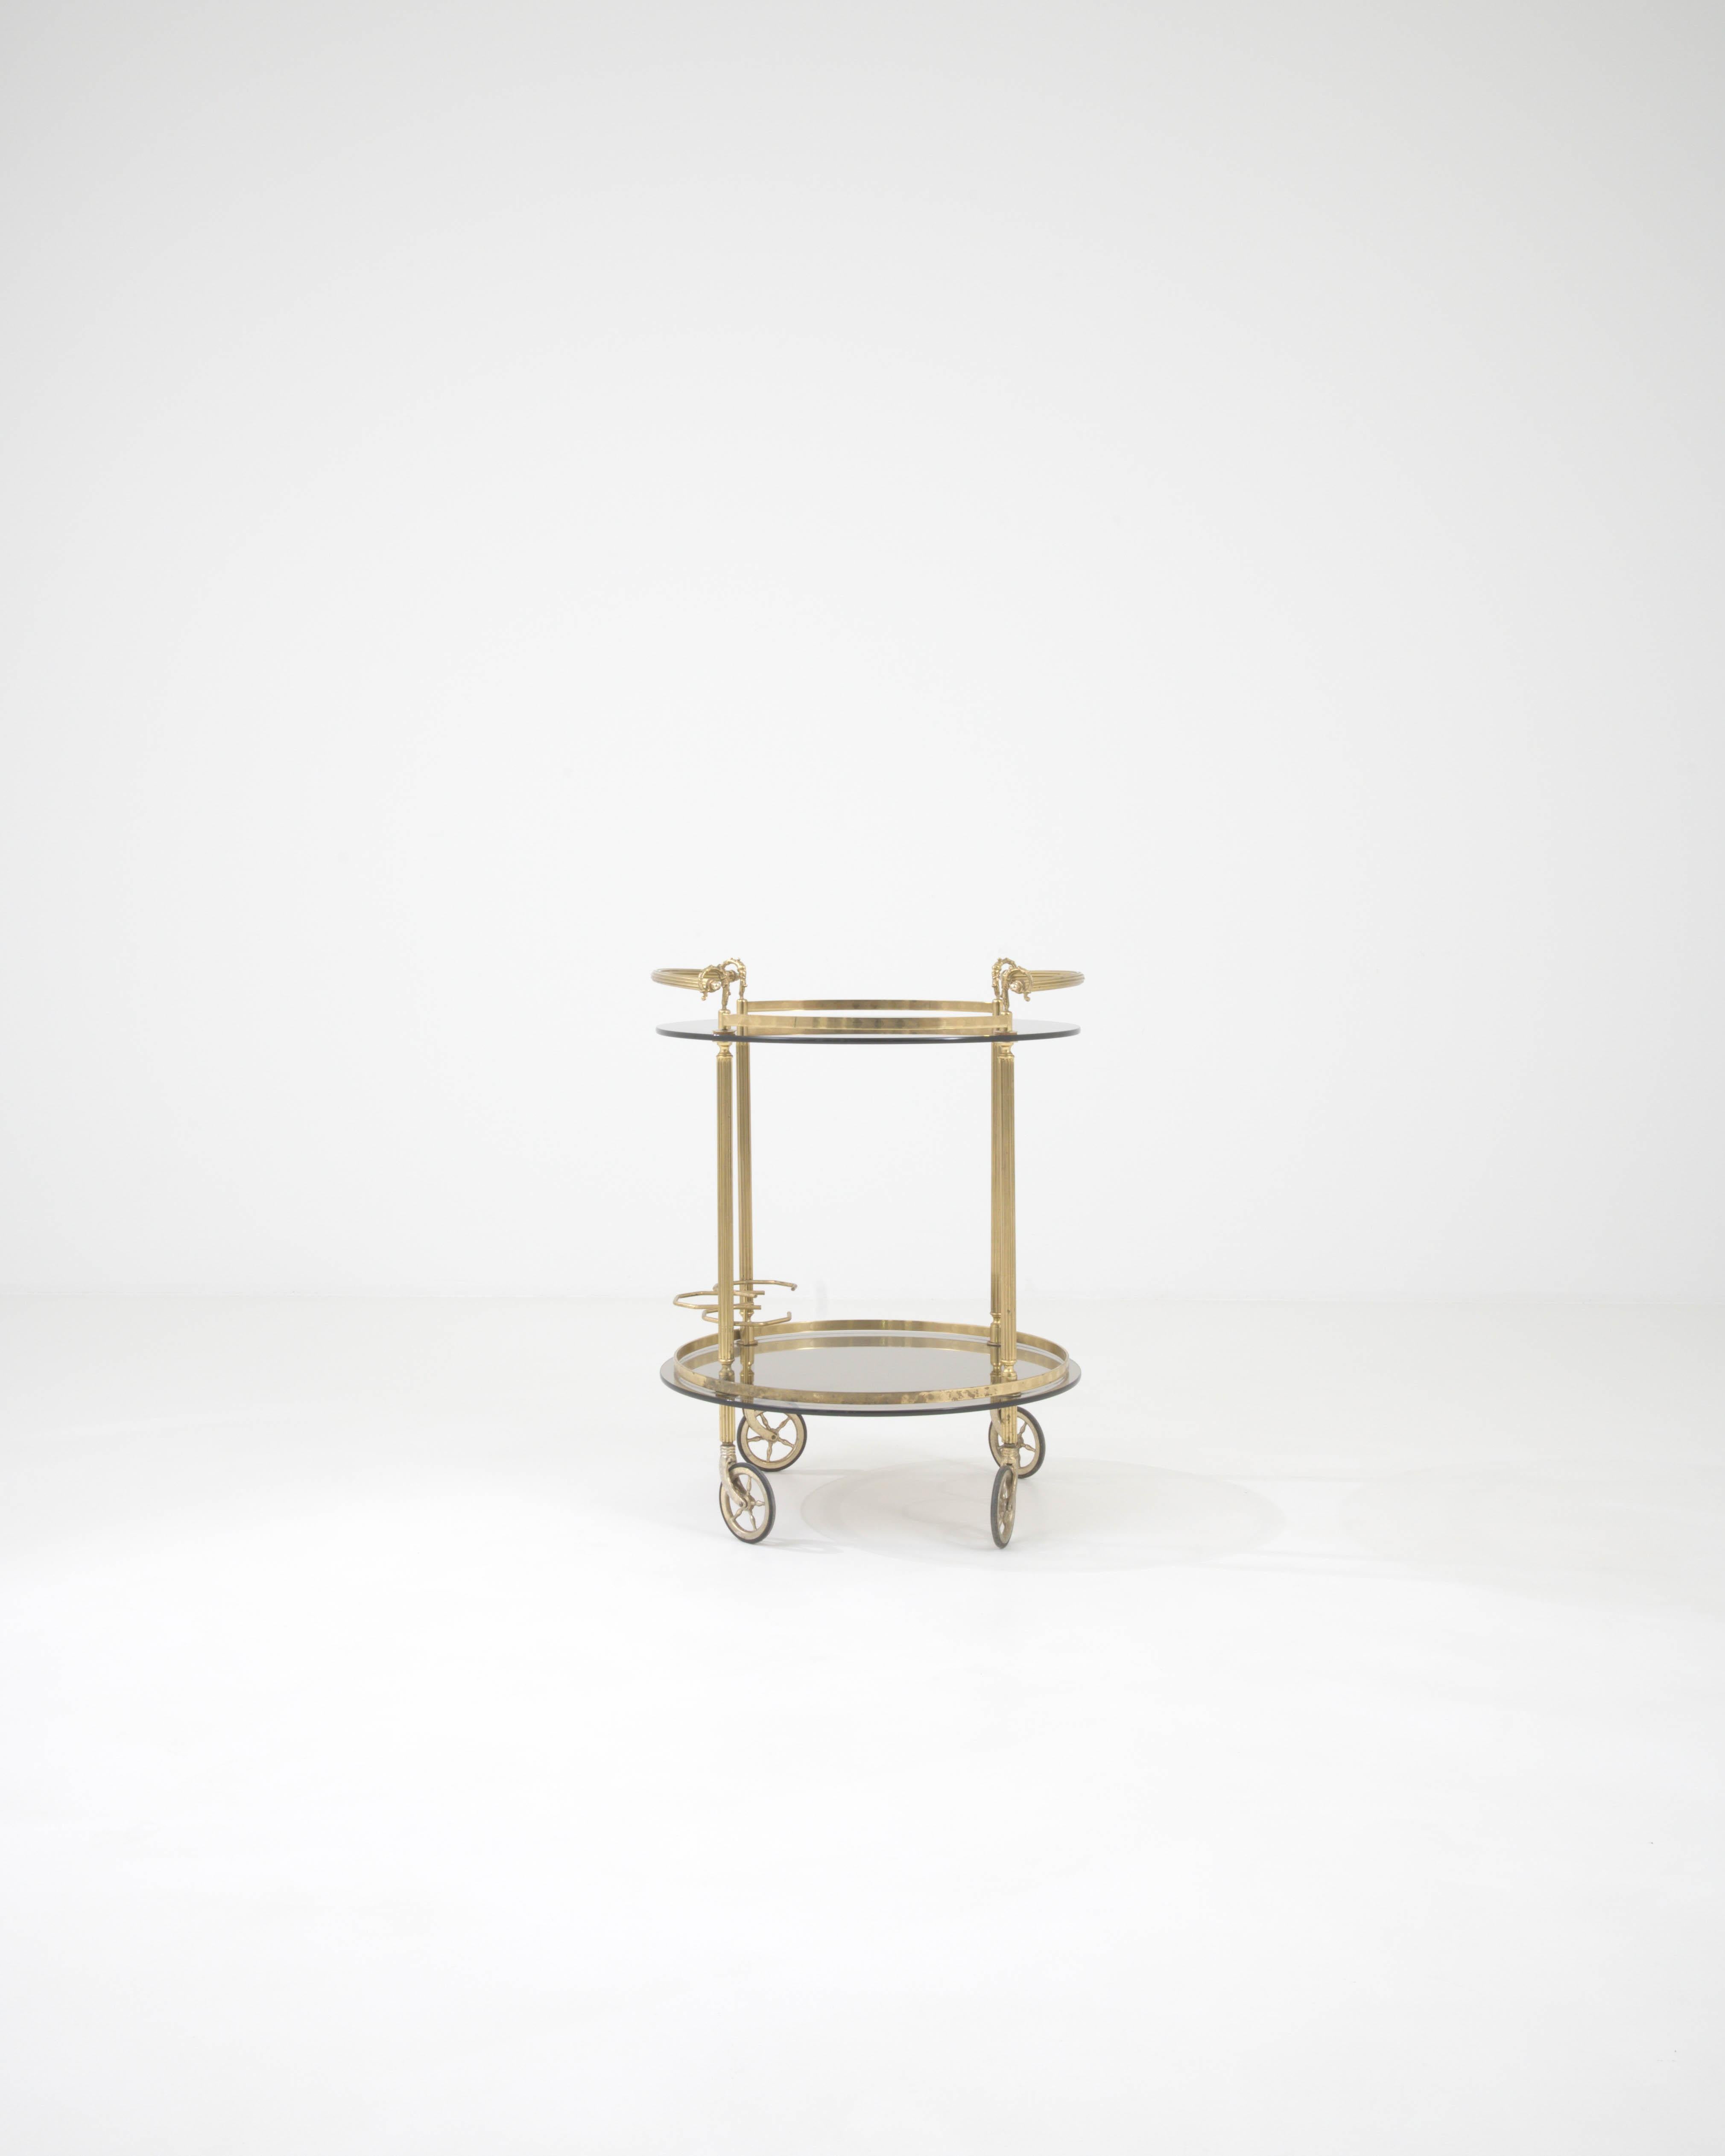 Indulge in the lavish charm of this 20th Century French Brass & Glass Bar Cart, a chic and versatile addition to any modern home. The polished brass structure shines with a timeless glow, accentuated by ornate details such as the elegant finial